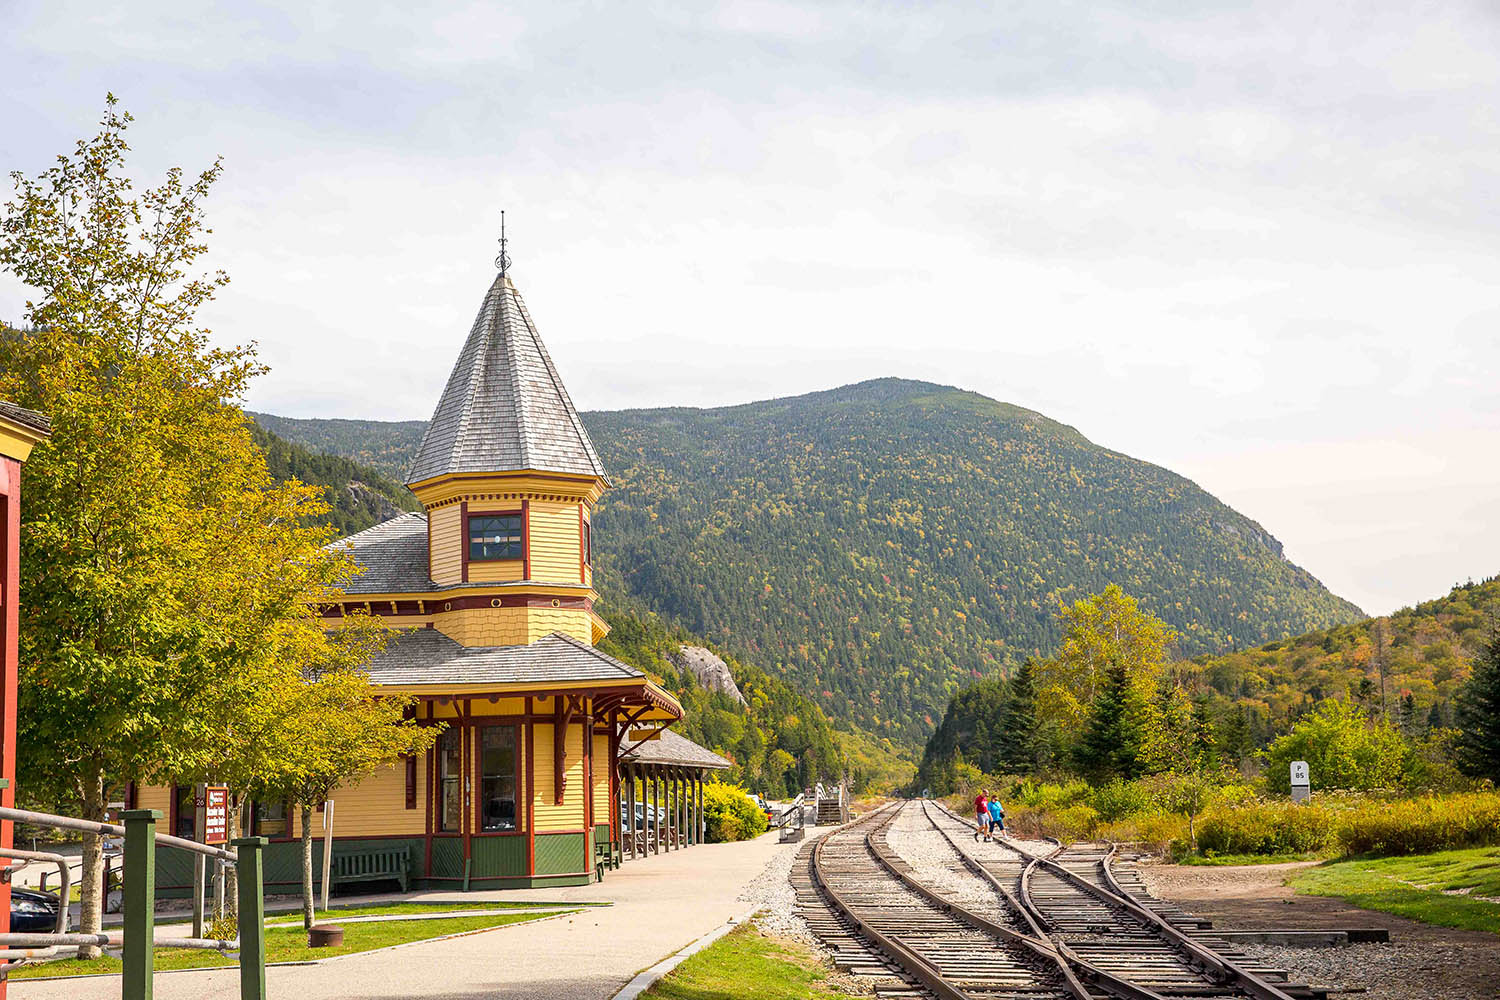 Railway station surrounded by mountains and foliage